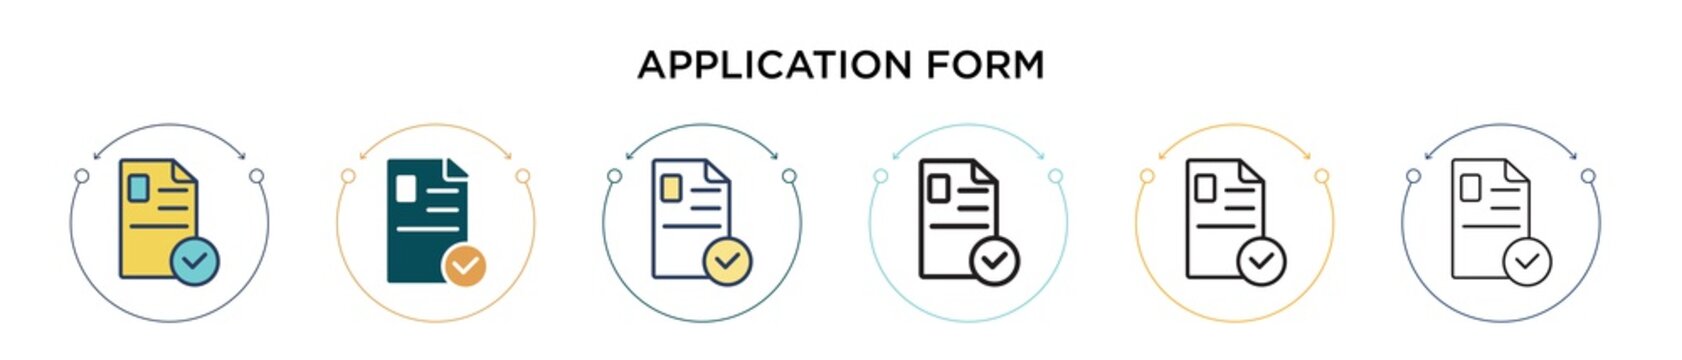 Application form icon in filled, thin line, outline and stroke style. Vector illustration of two colored and black application form vector icons designs can be used for mobile, ui, web